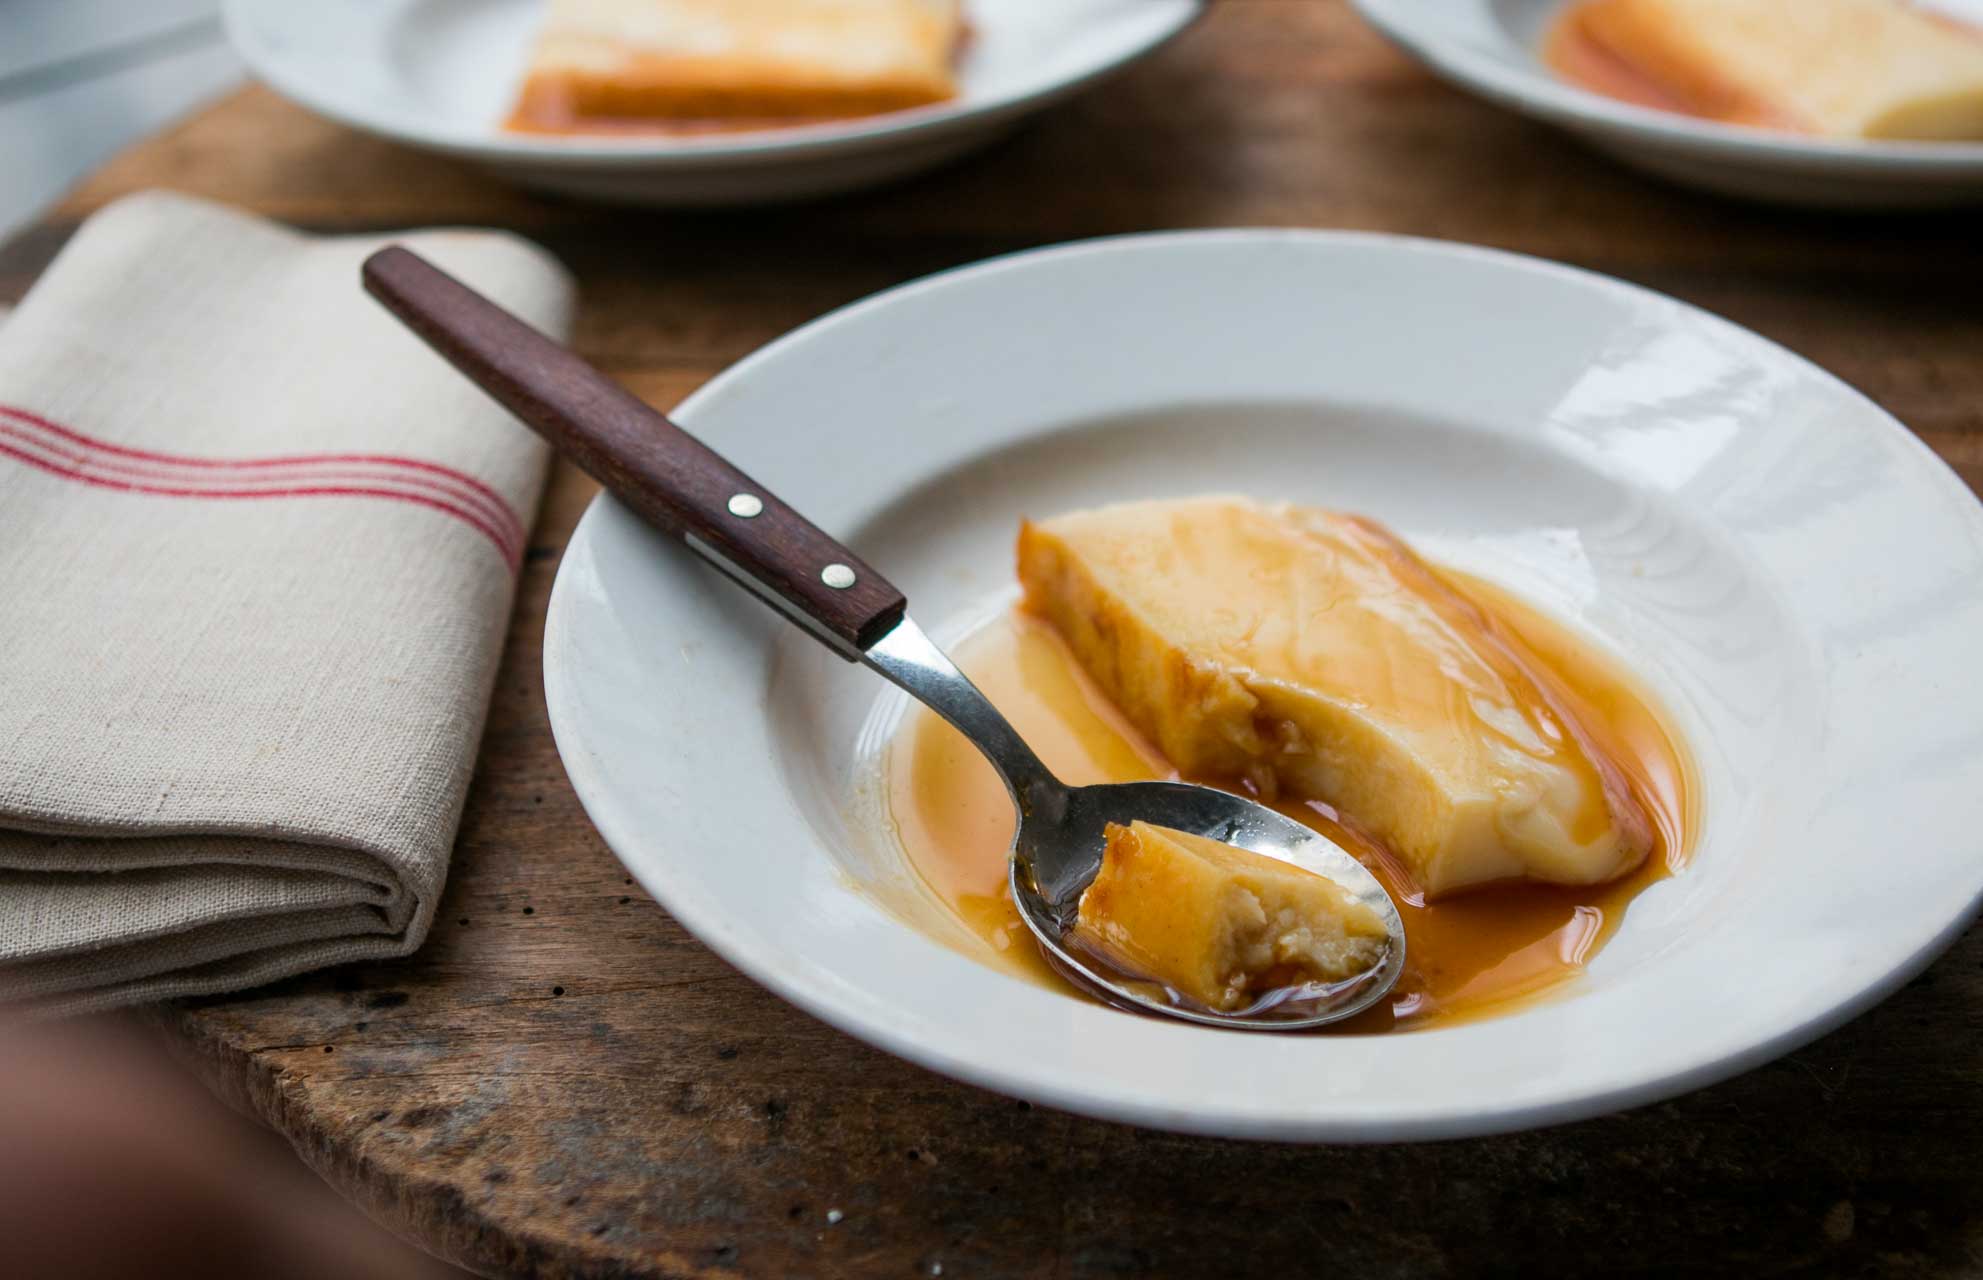 How make pastry, classic the Flan Creme French Caramel or to